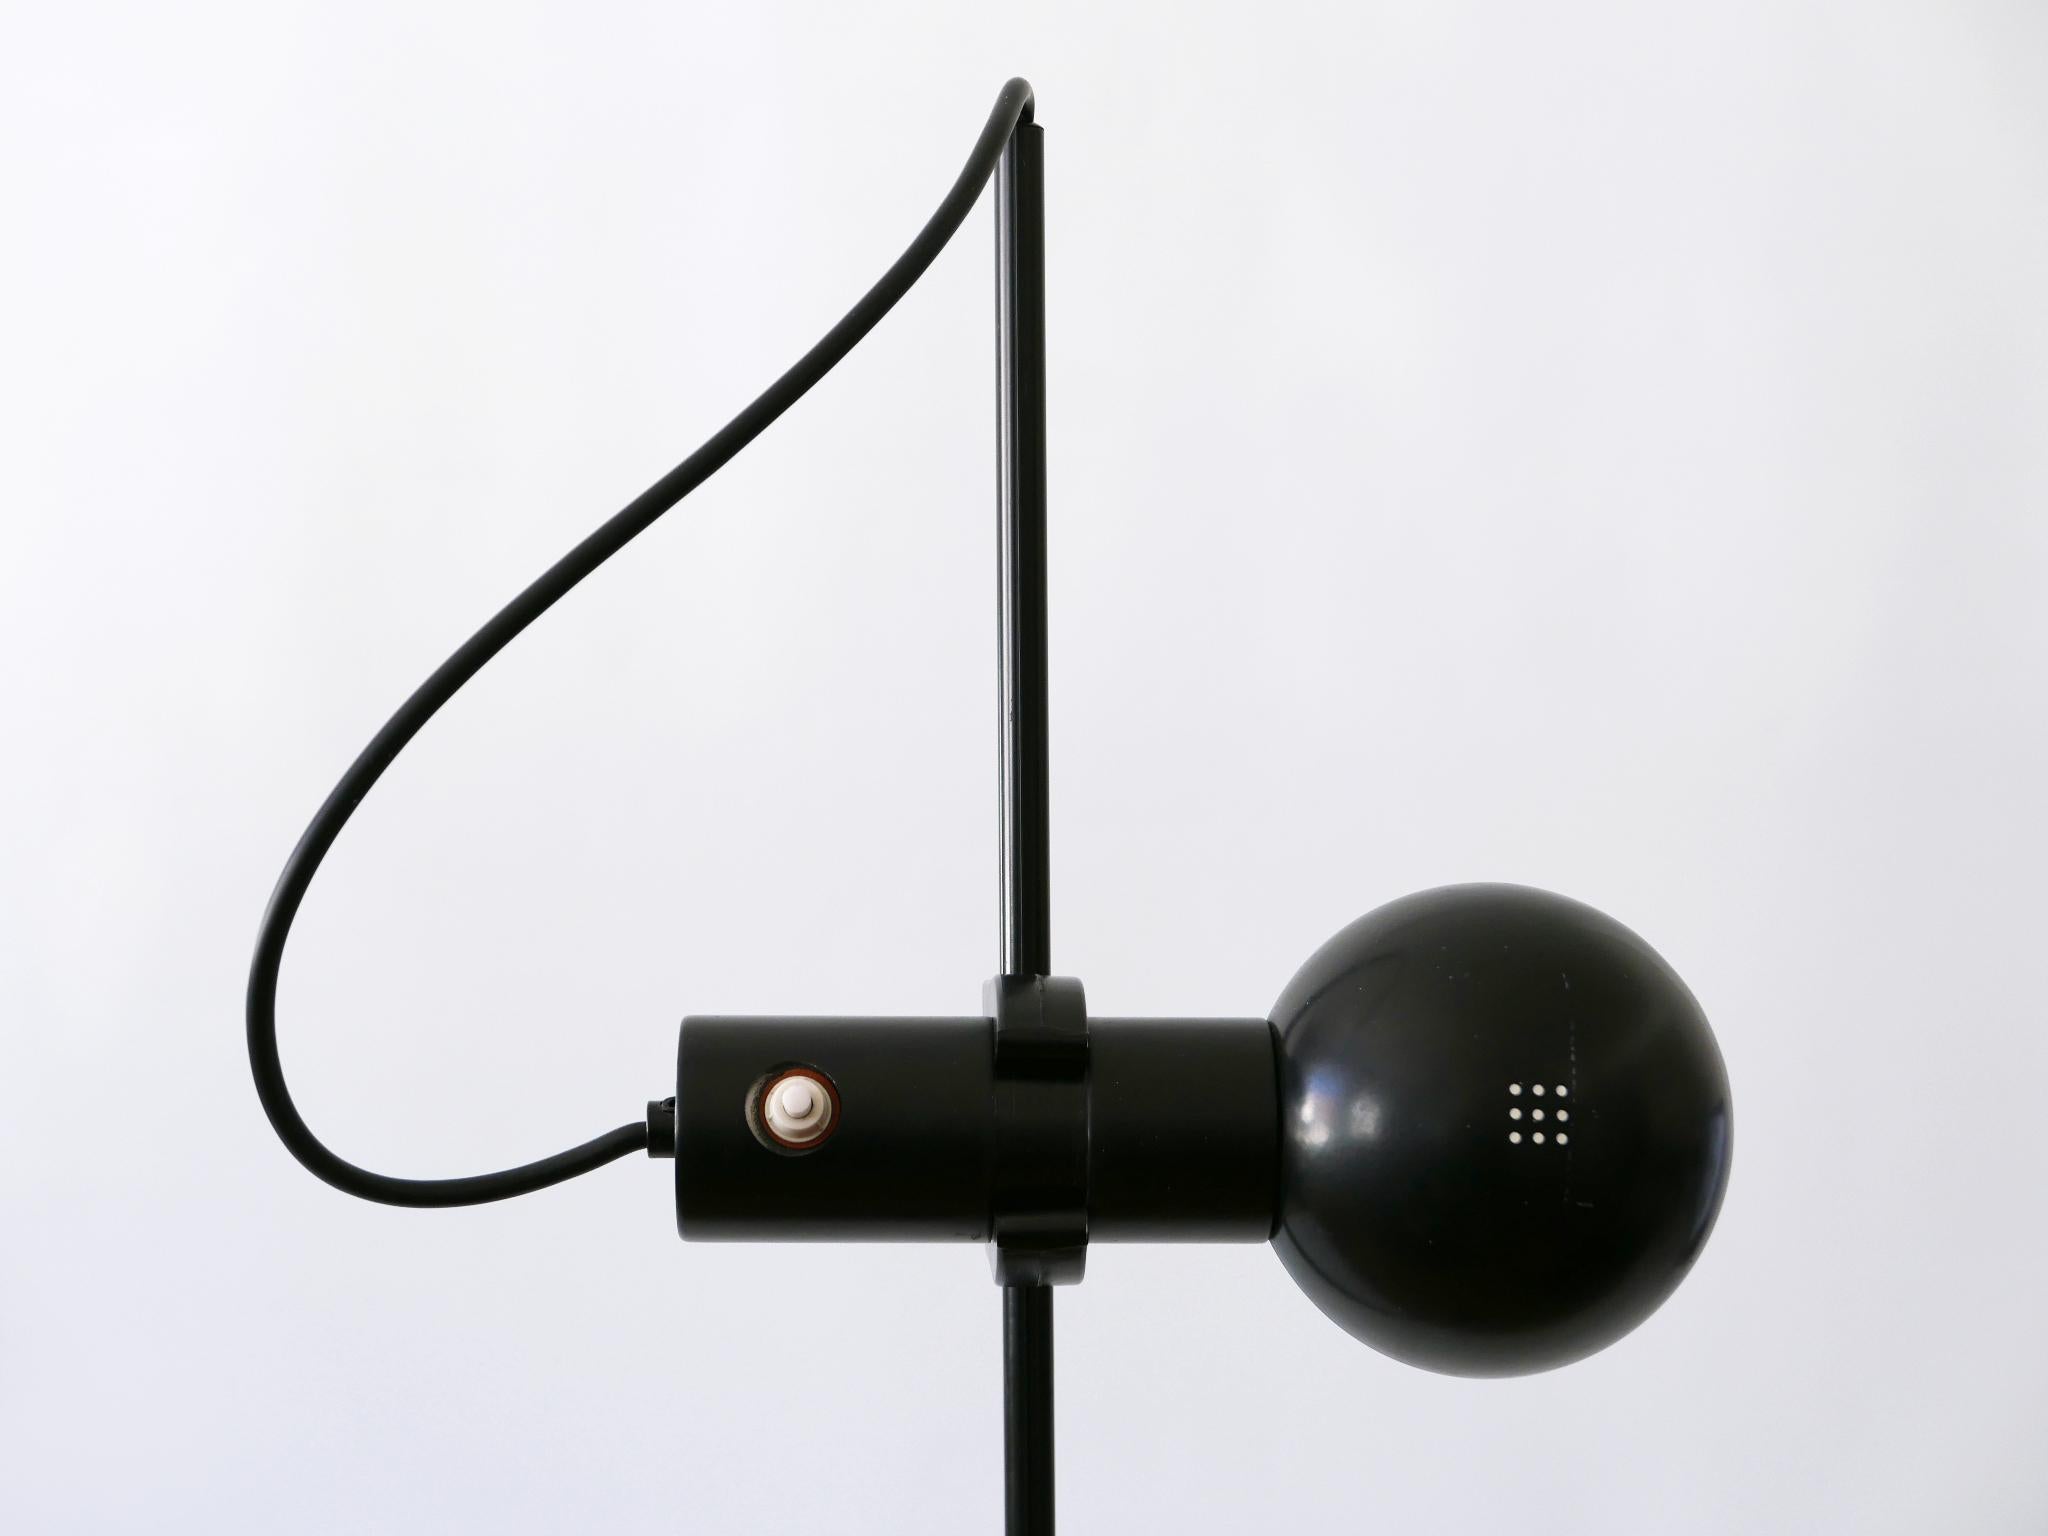 Mid-Century Modern Rare Floor Lamp or Reading Light by Barbieri e Marianelli for Tronconi 1970s For Sale